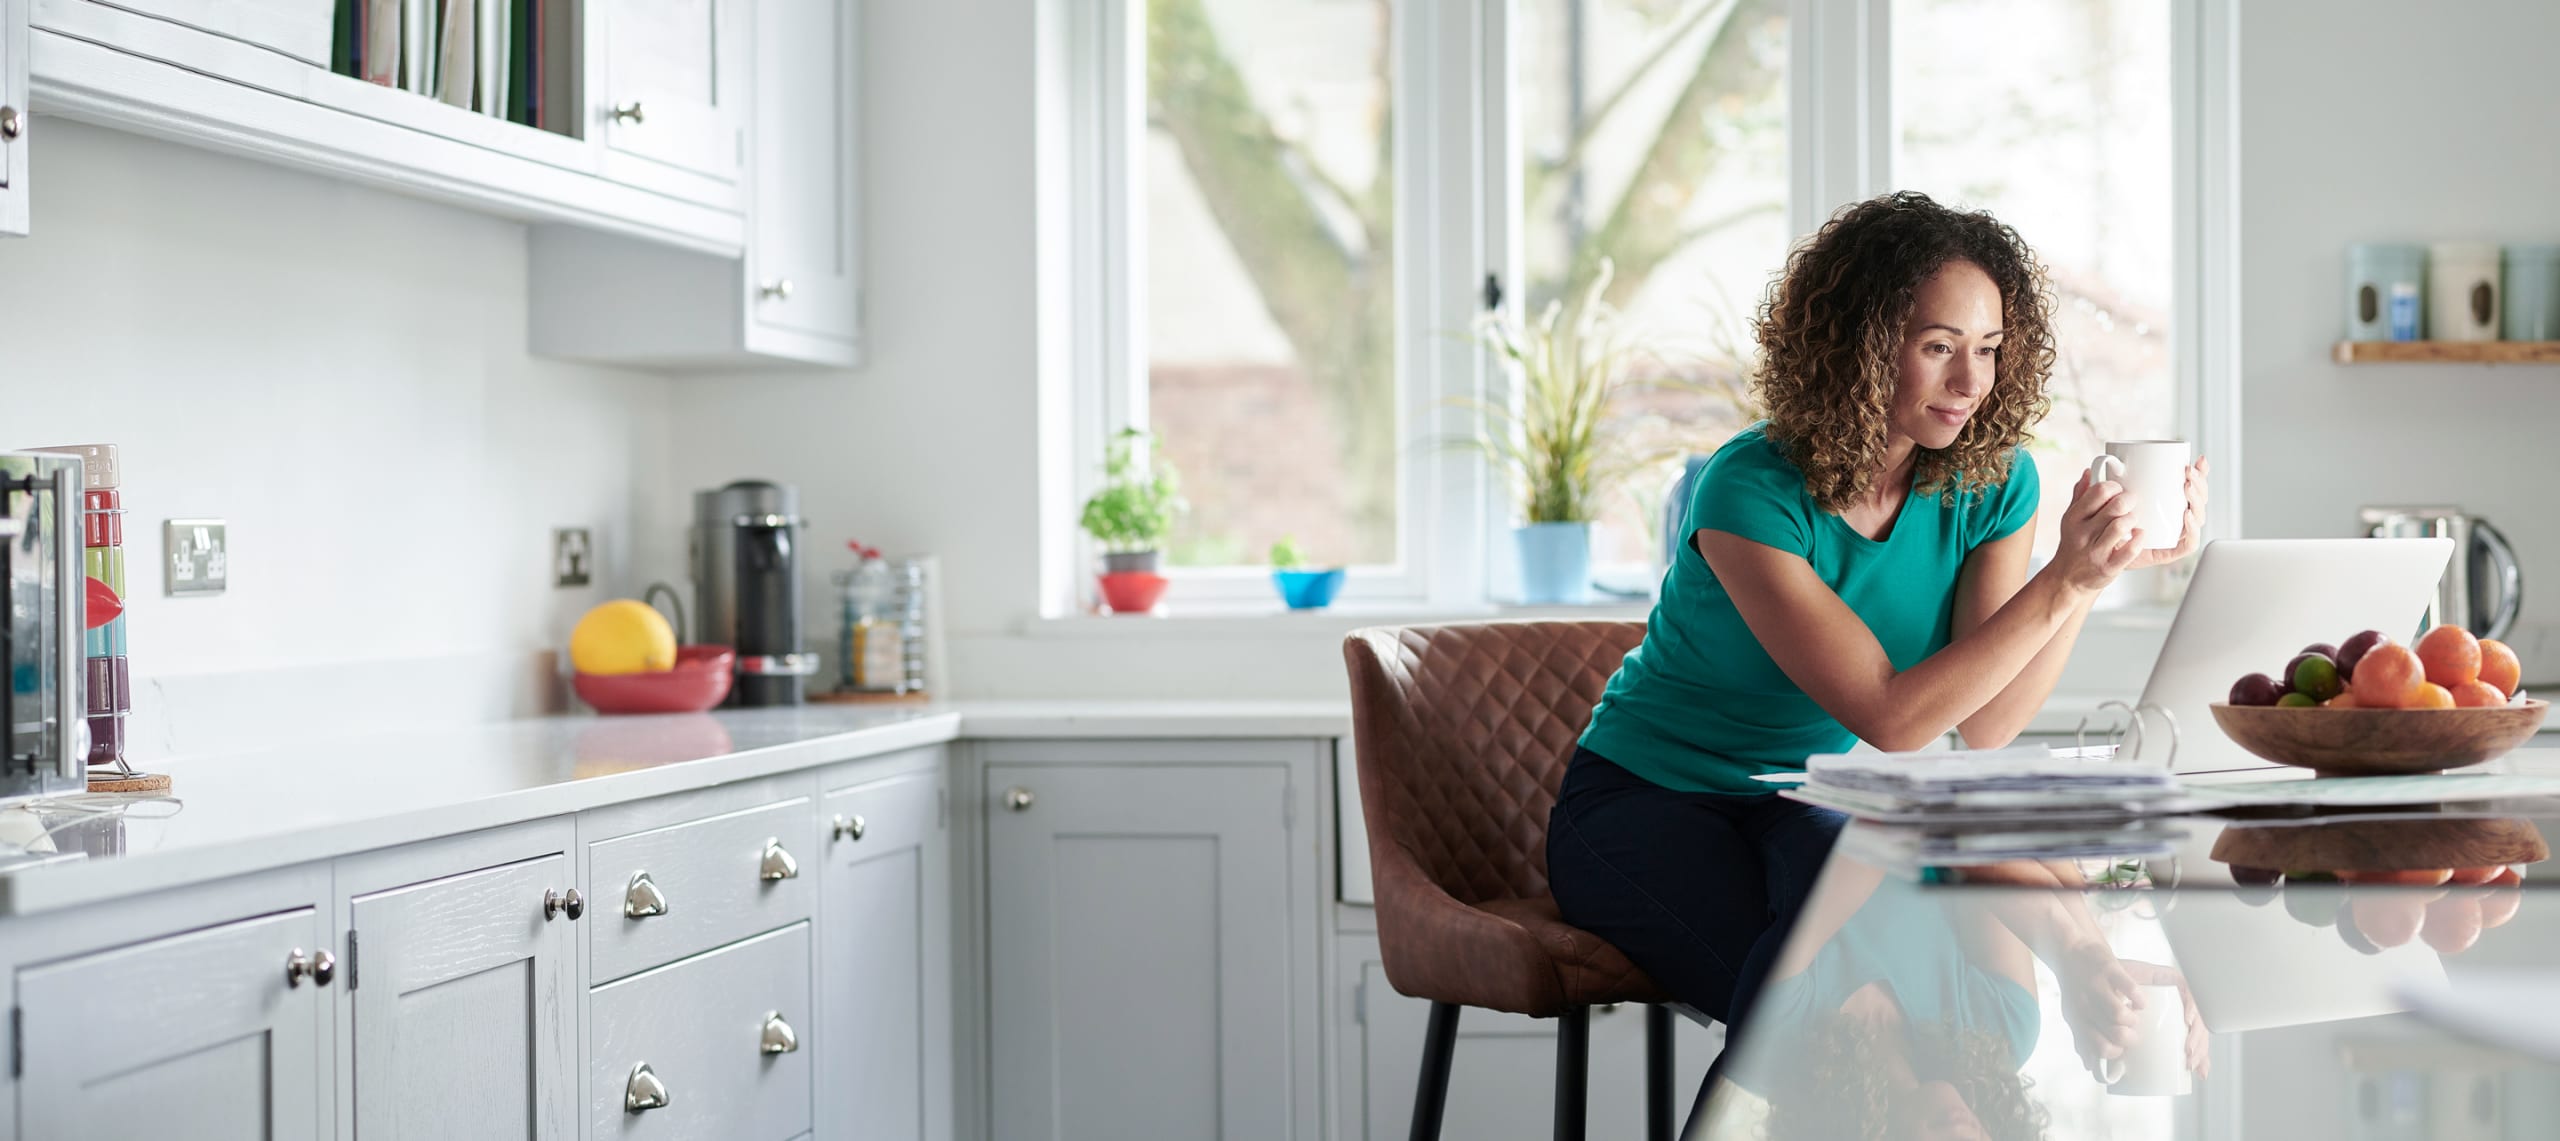 woman at kitchen counter drinking coffee using CenturyLink internet to check her email